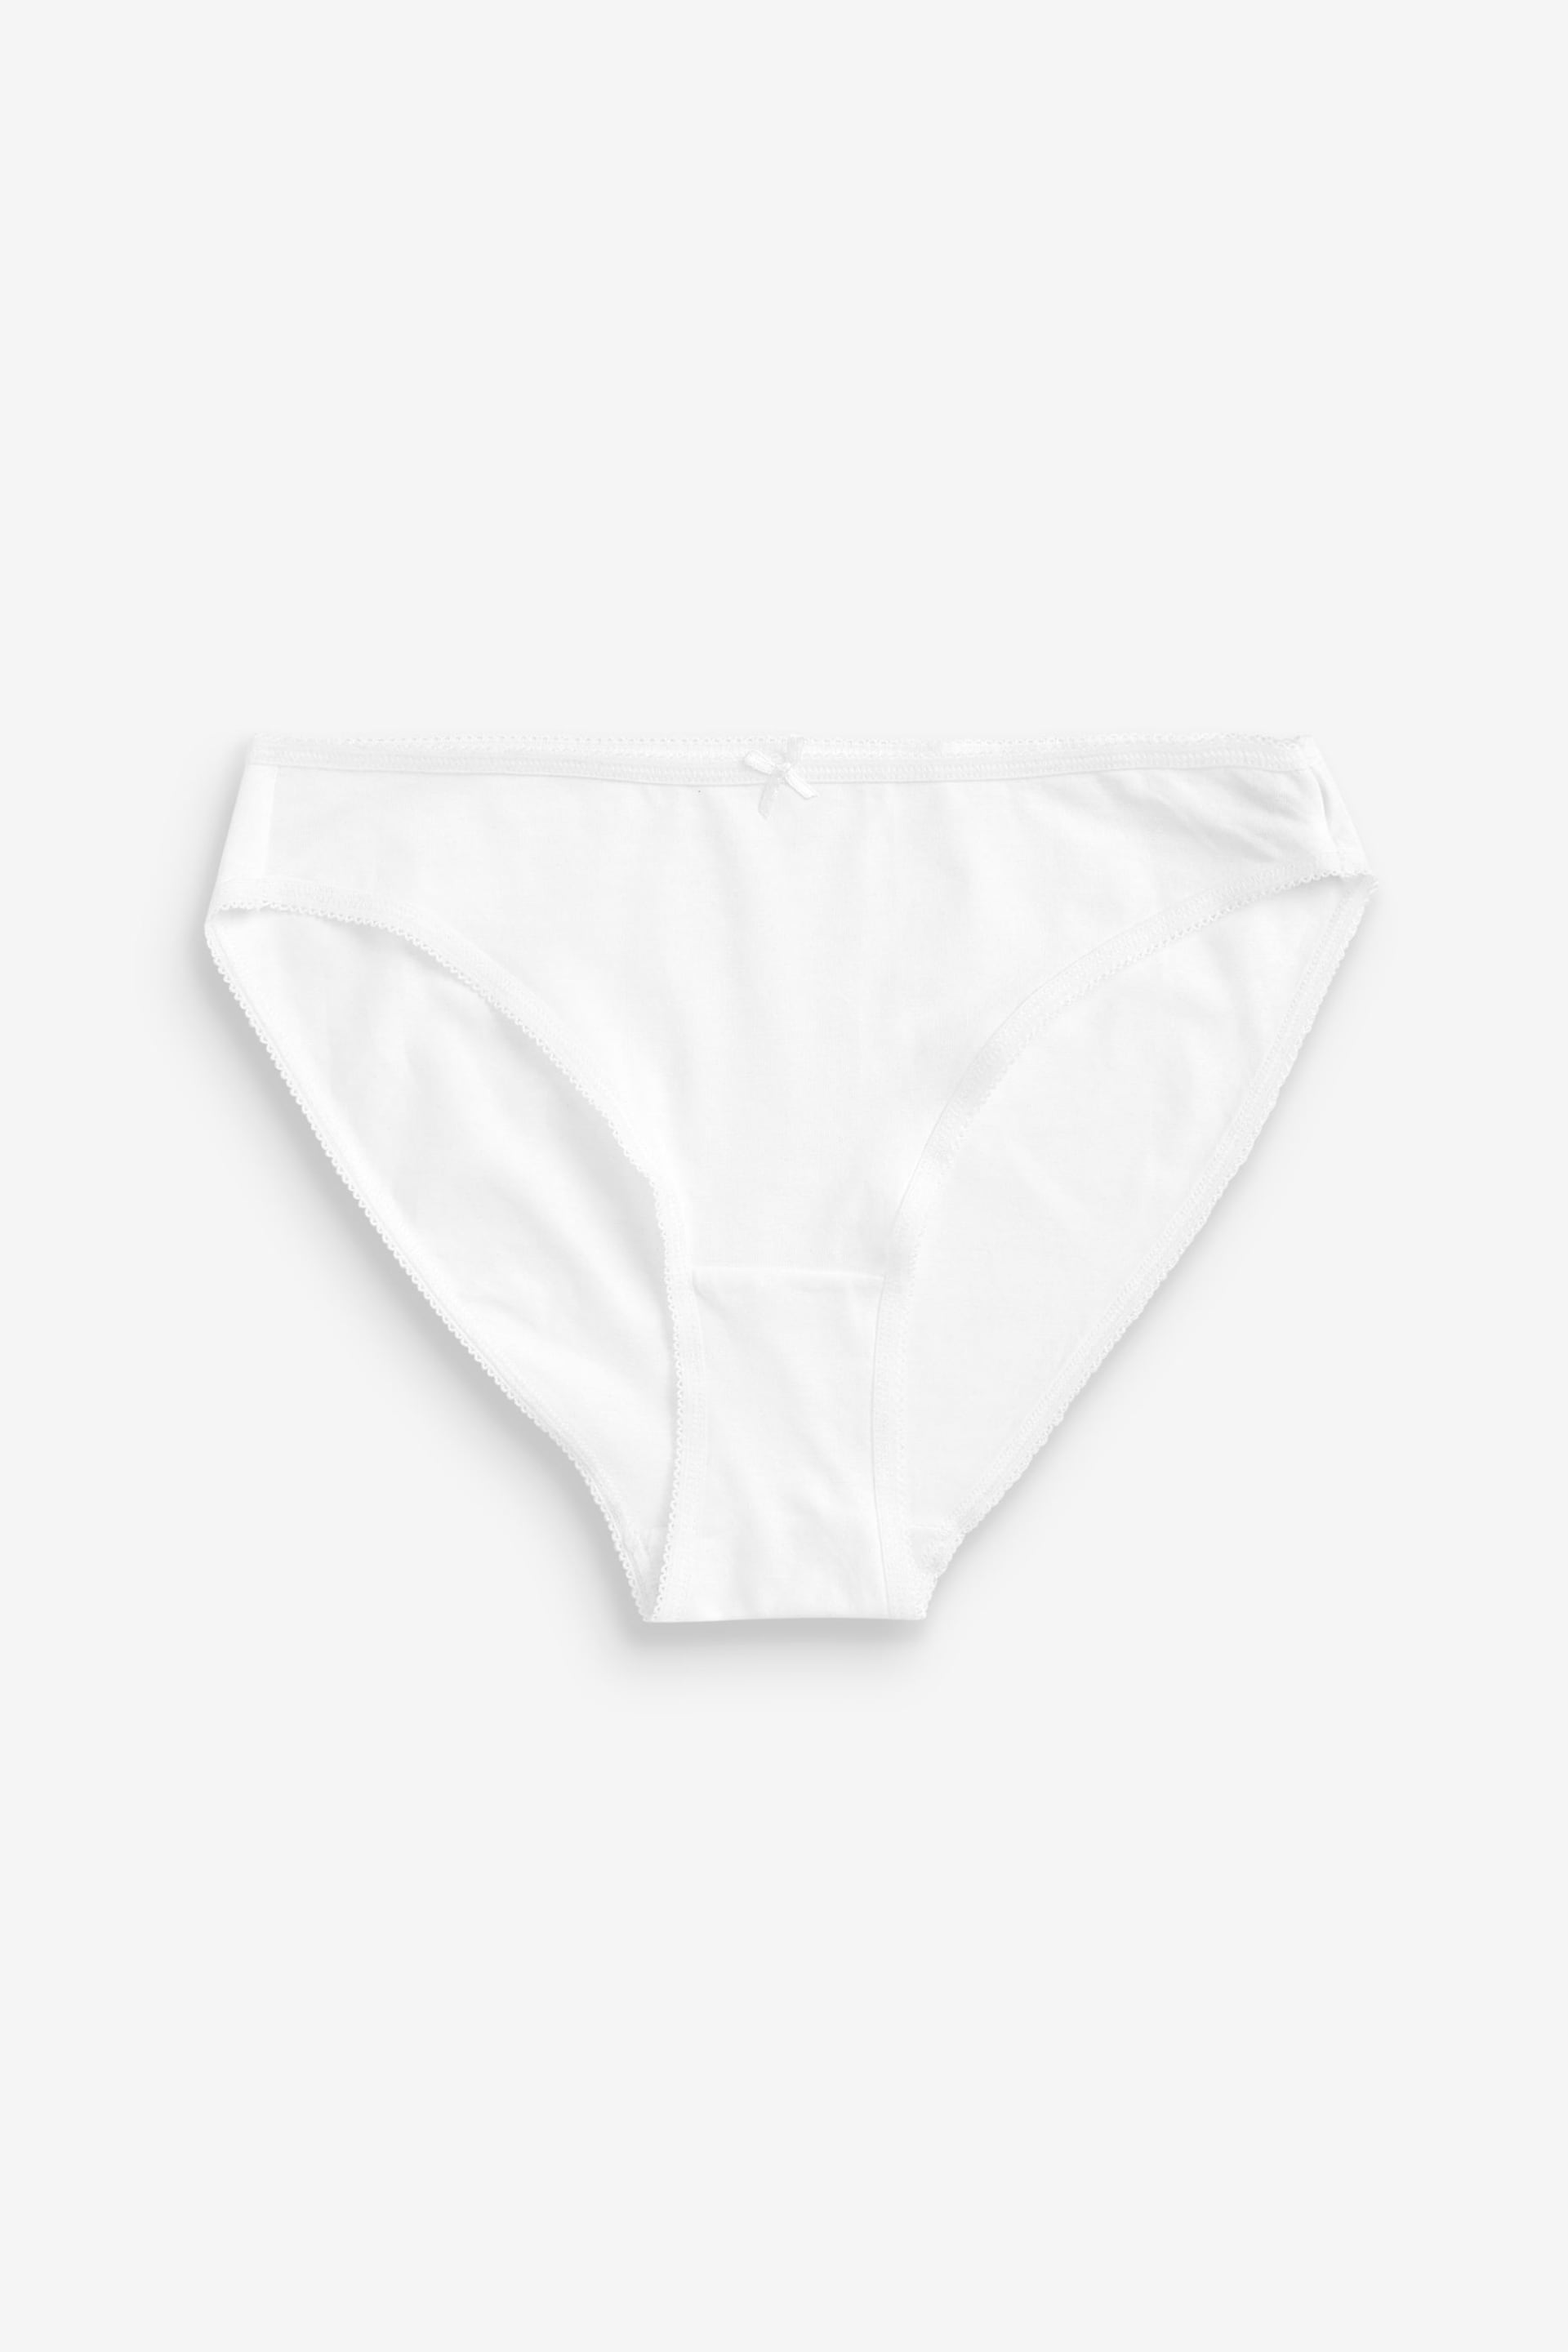 White High Leg Cotton Rich Knickers 4 Pack - Image 2 of 5